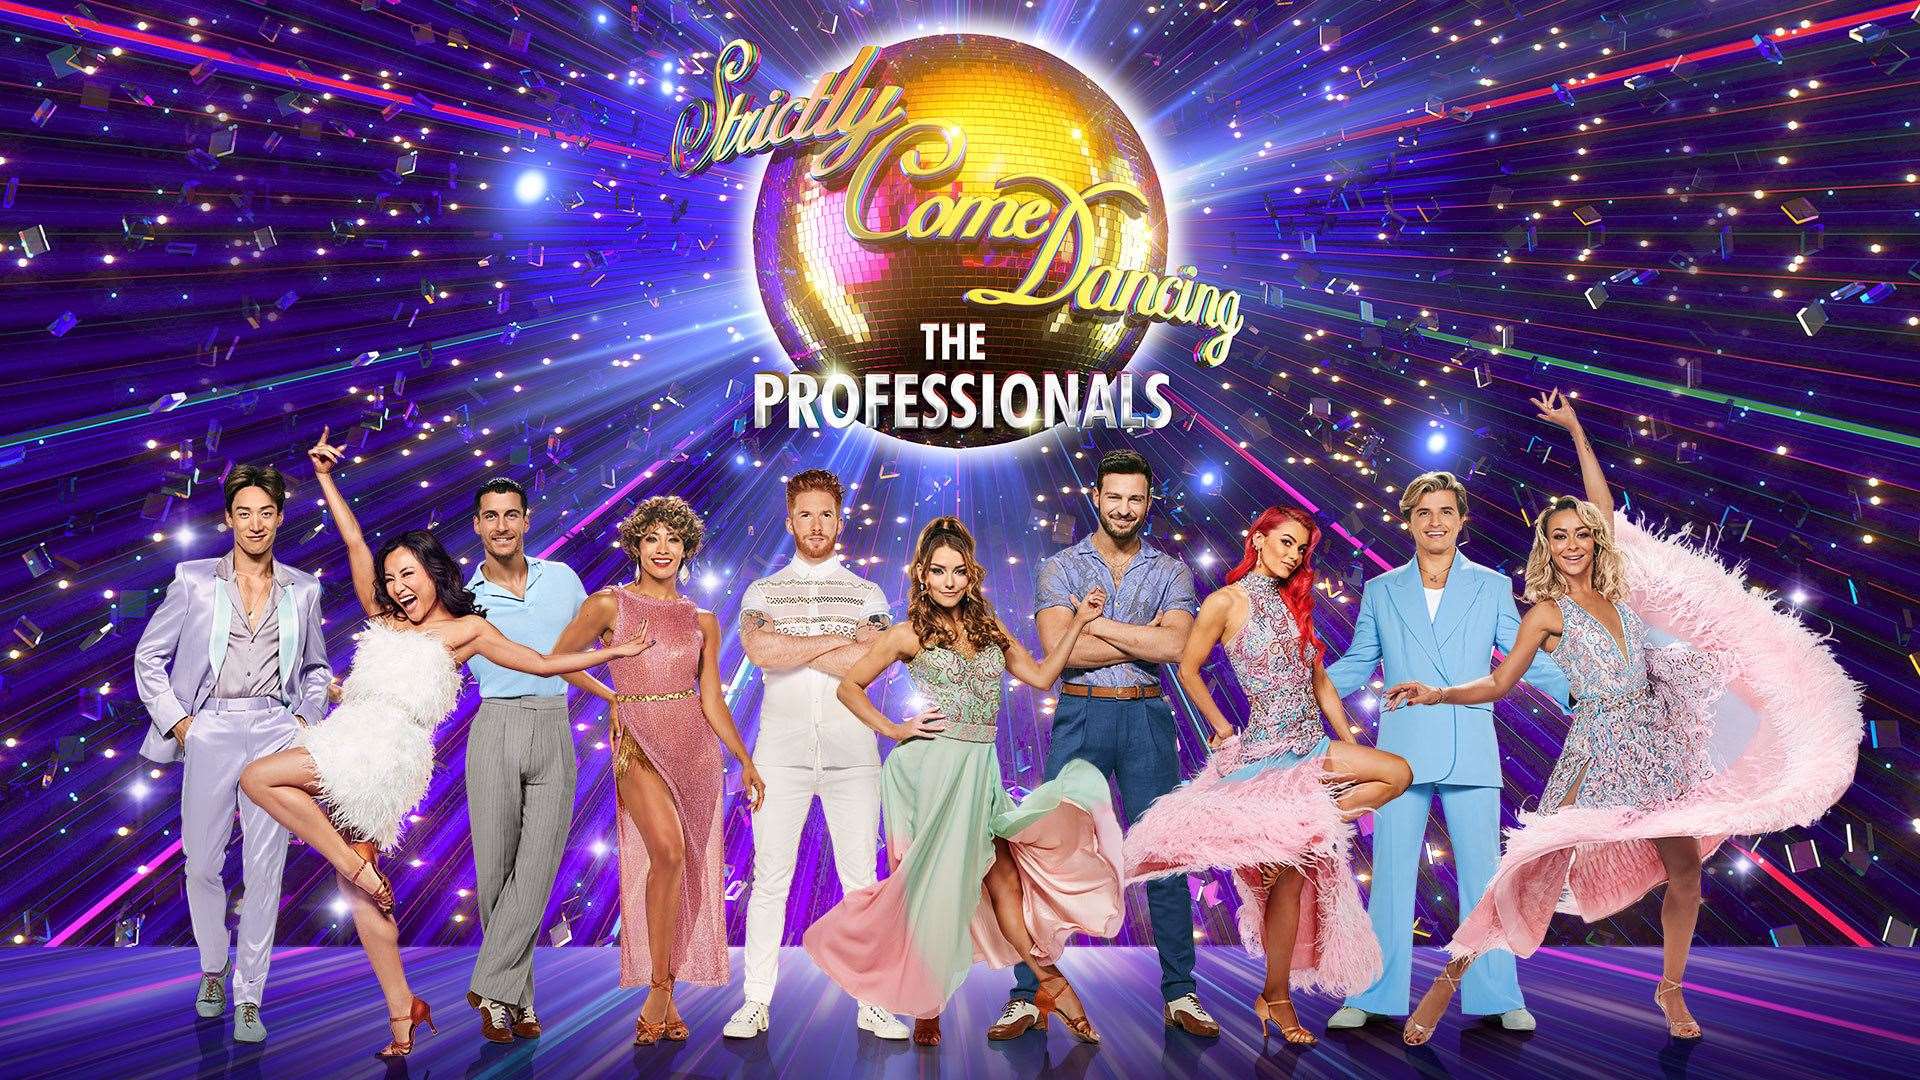 Strictly Come Dancing The Professionals rolls into Aberdeen next May.